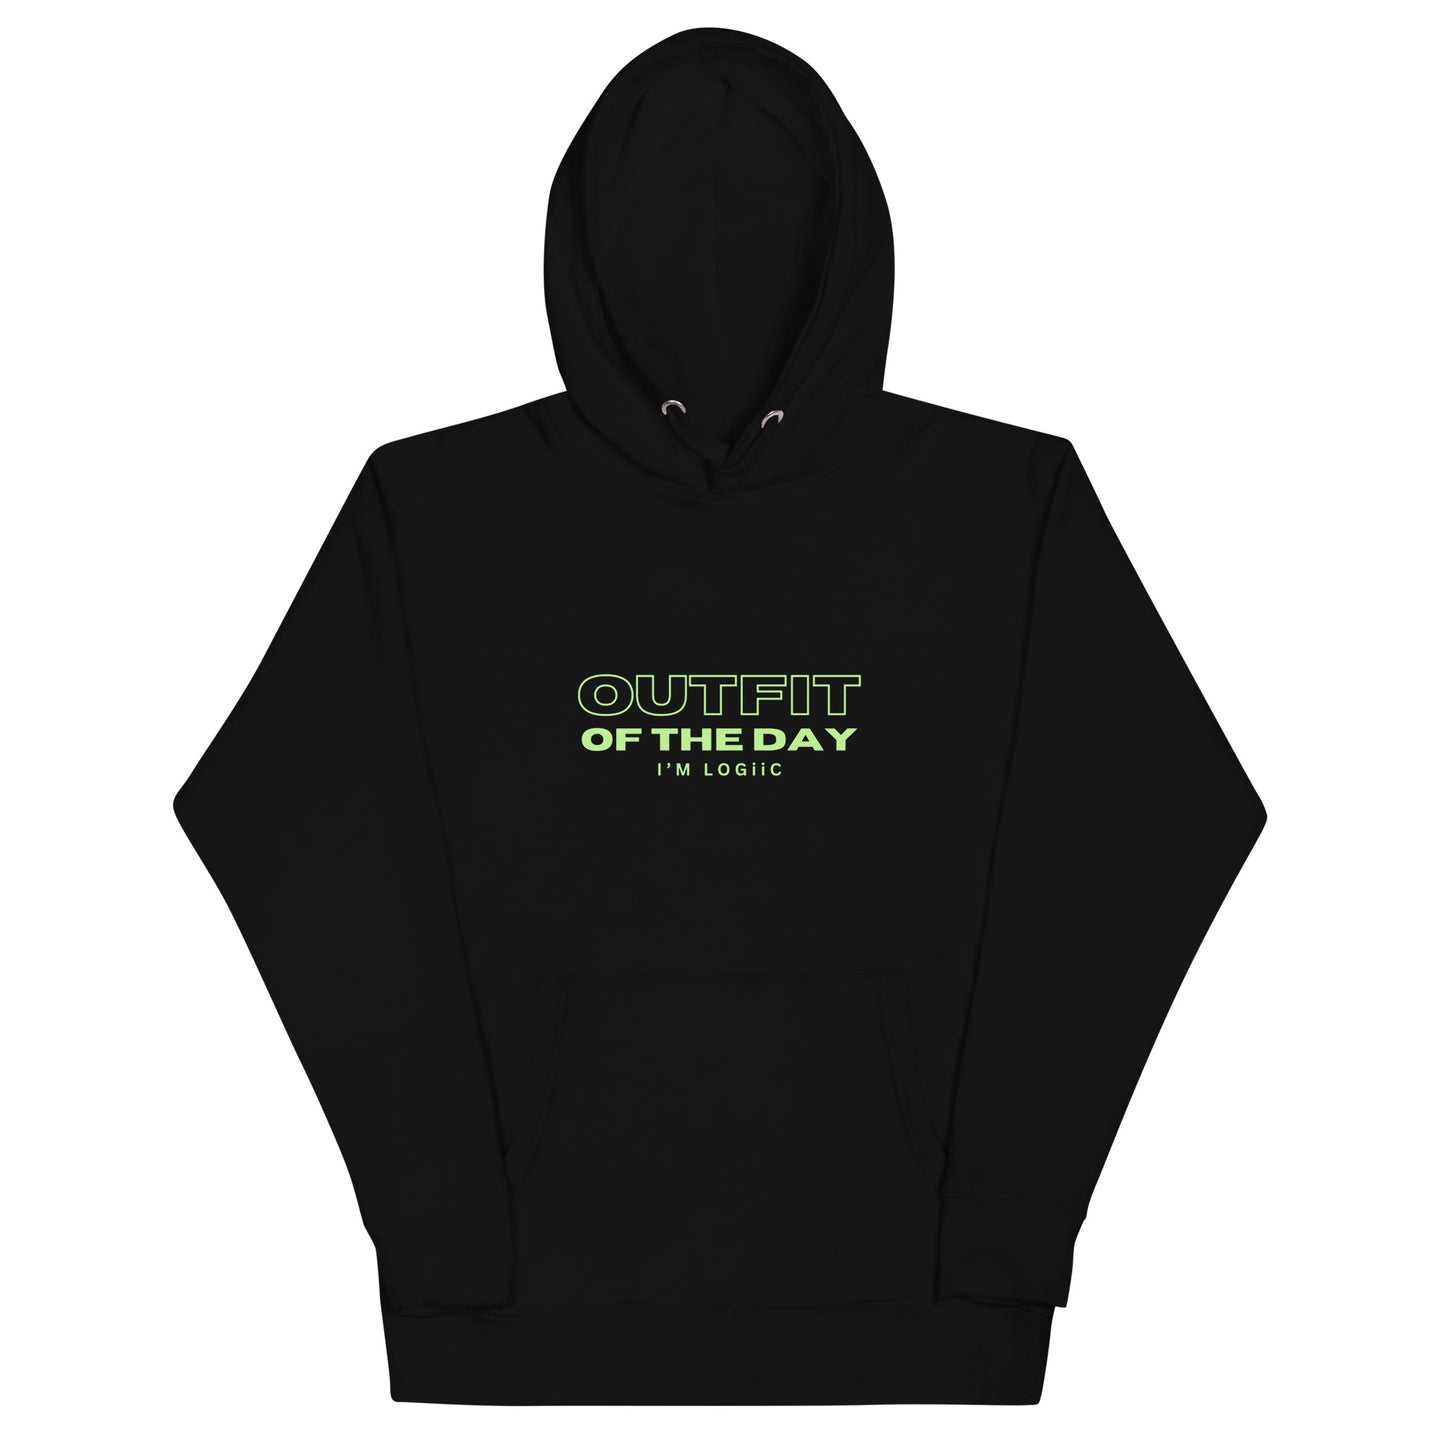 Outfit of the Day Unisex Hoodie